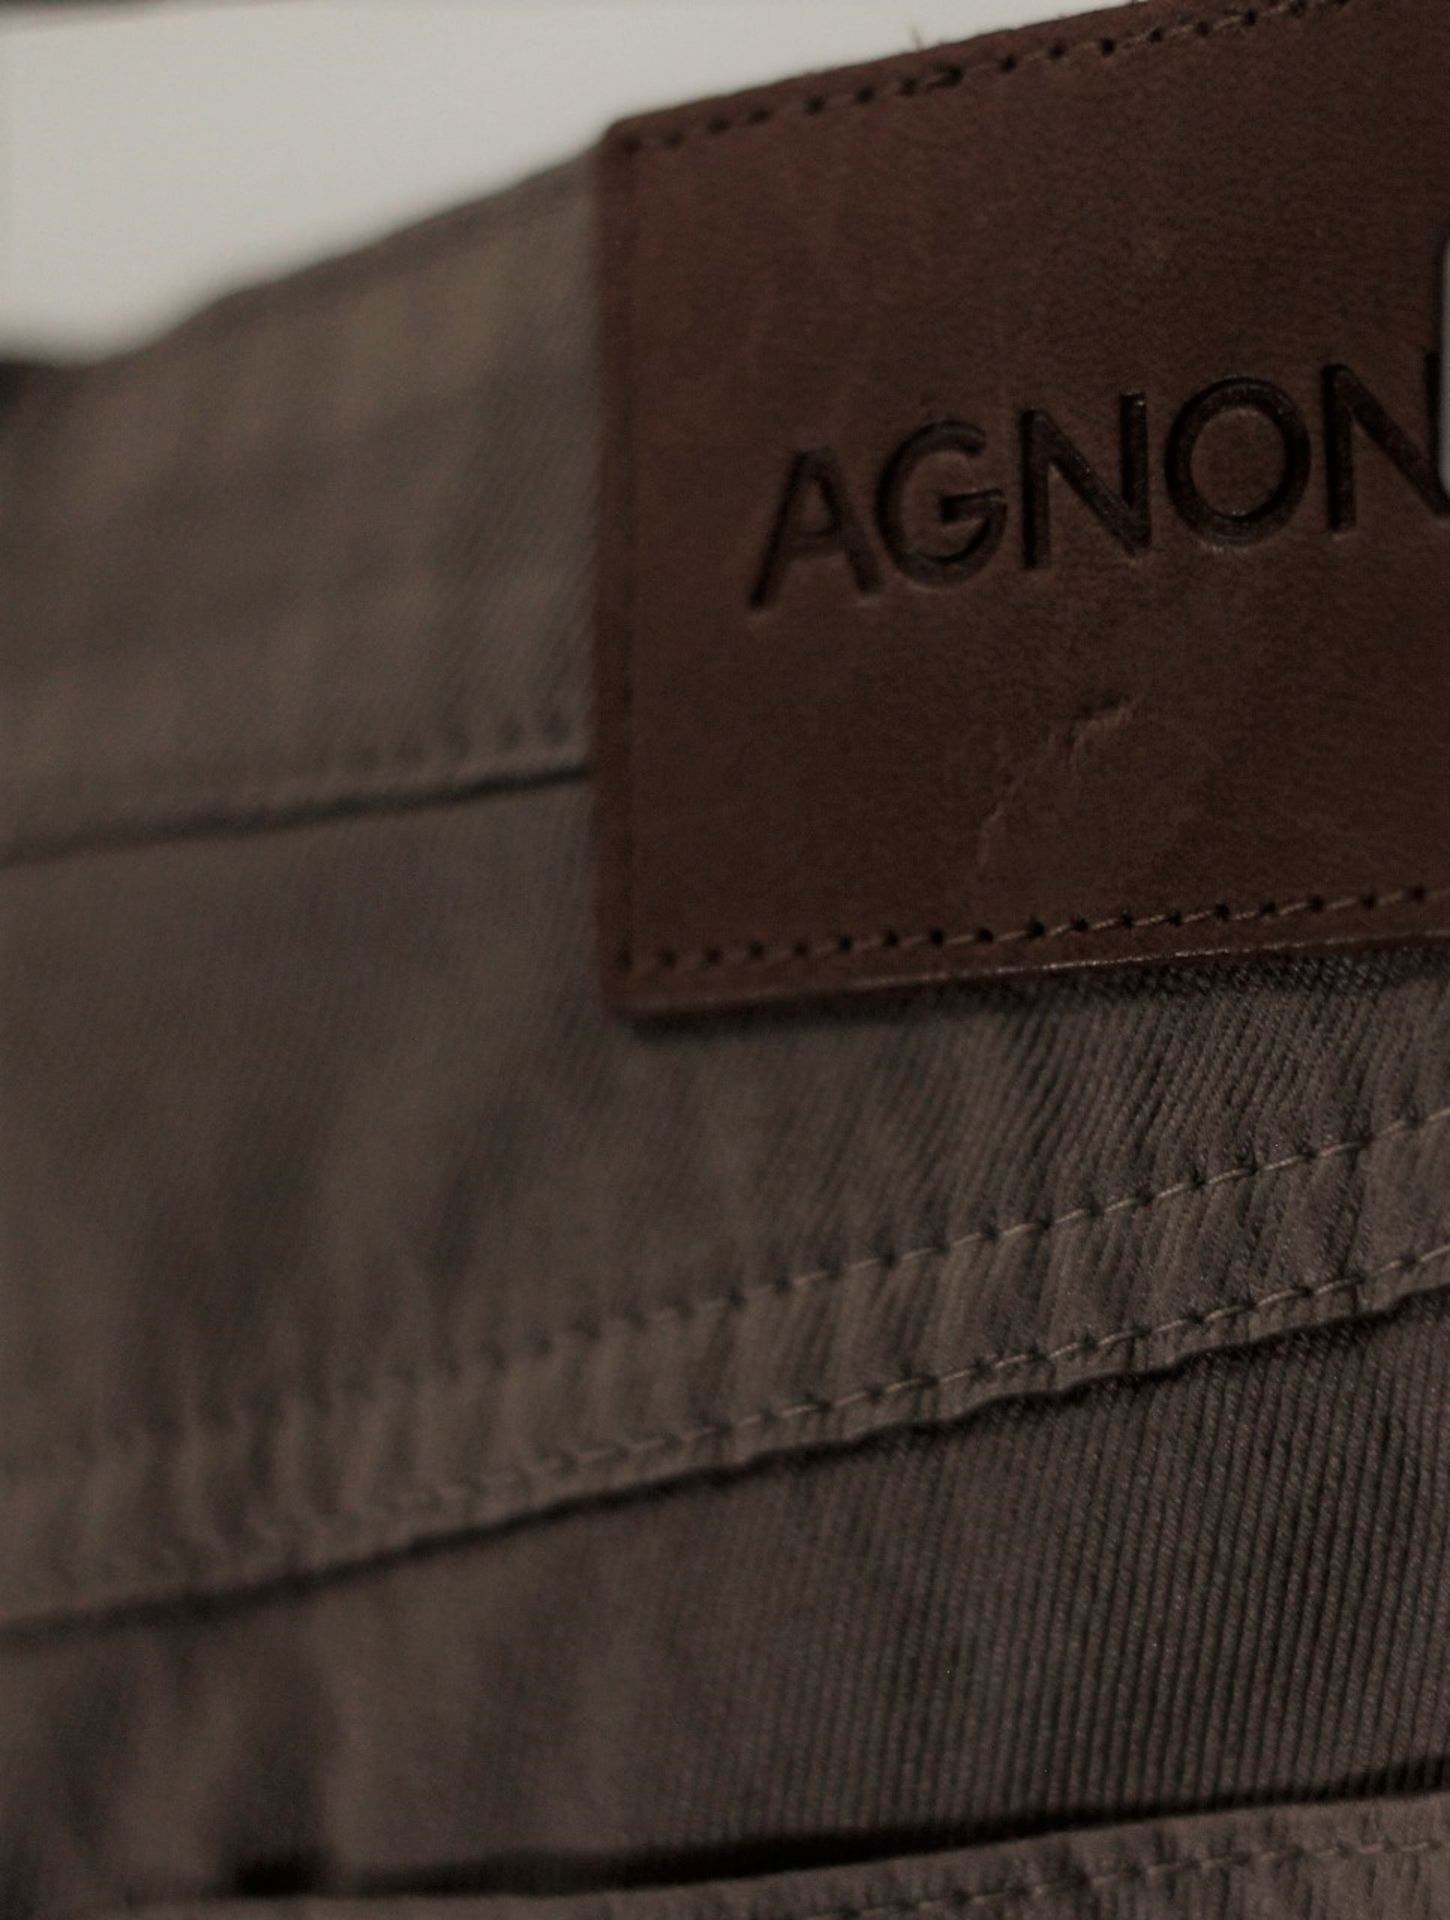 1 x Agnona Brown Jeans - Size: 16 - Material: 97% Cotton, 2% Elastane. Lining 100% Cotton - From a - Image 3 of 7